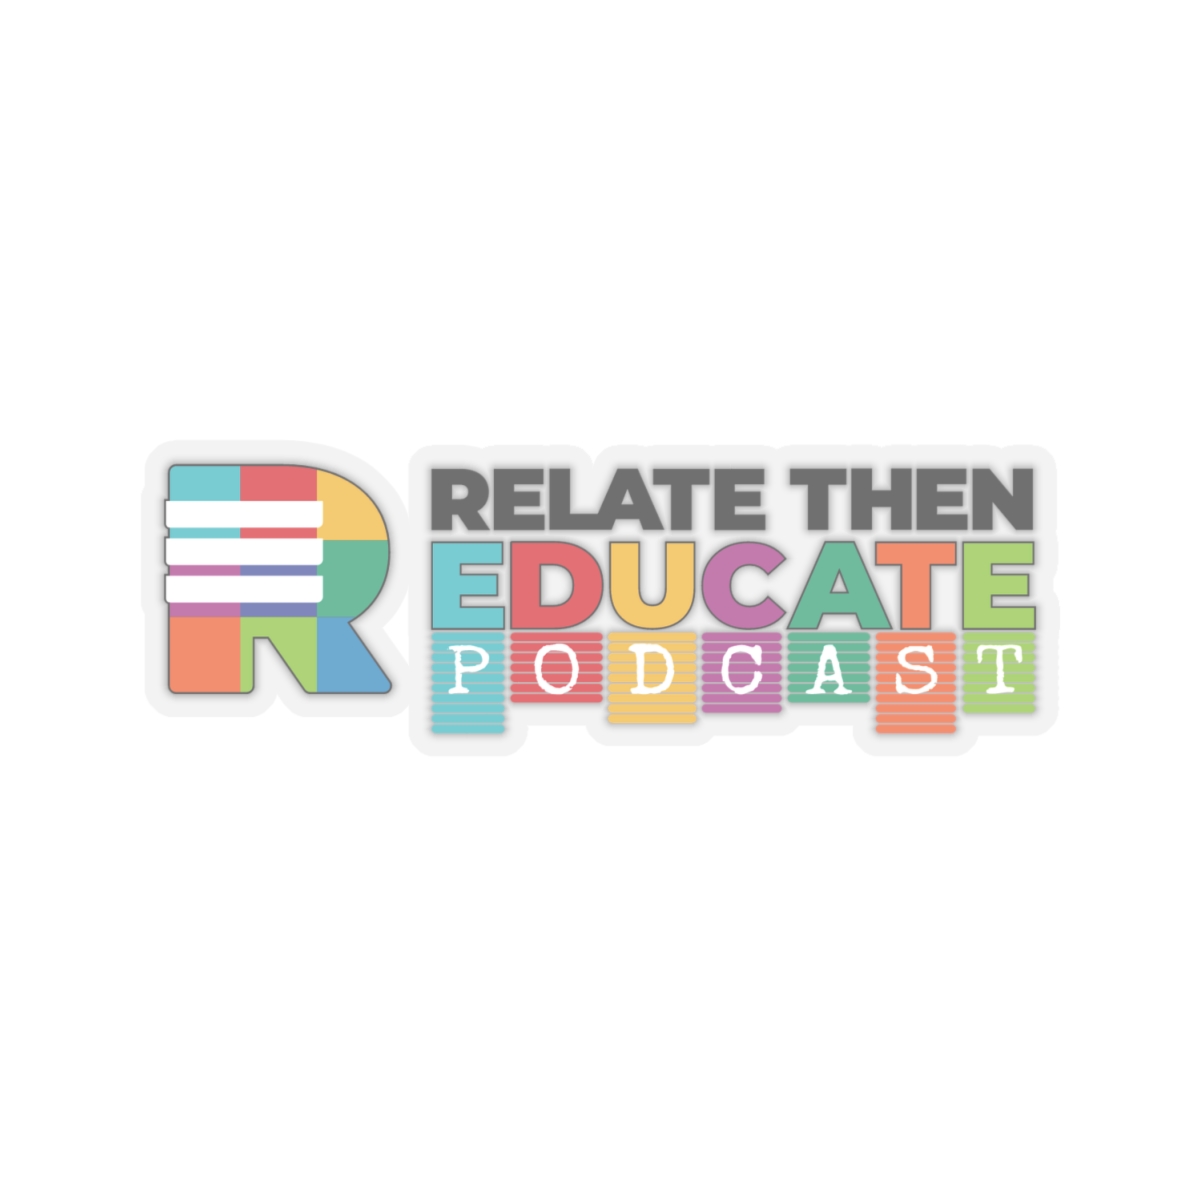 Relate Then Educate Podcast Stickers for Teachers product thumbnail image